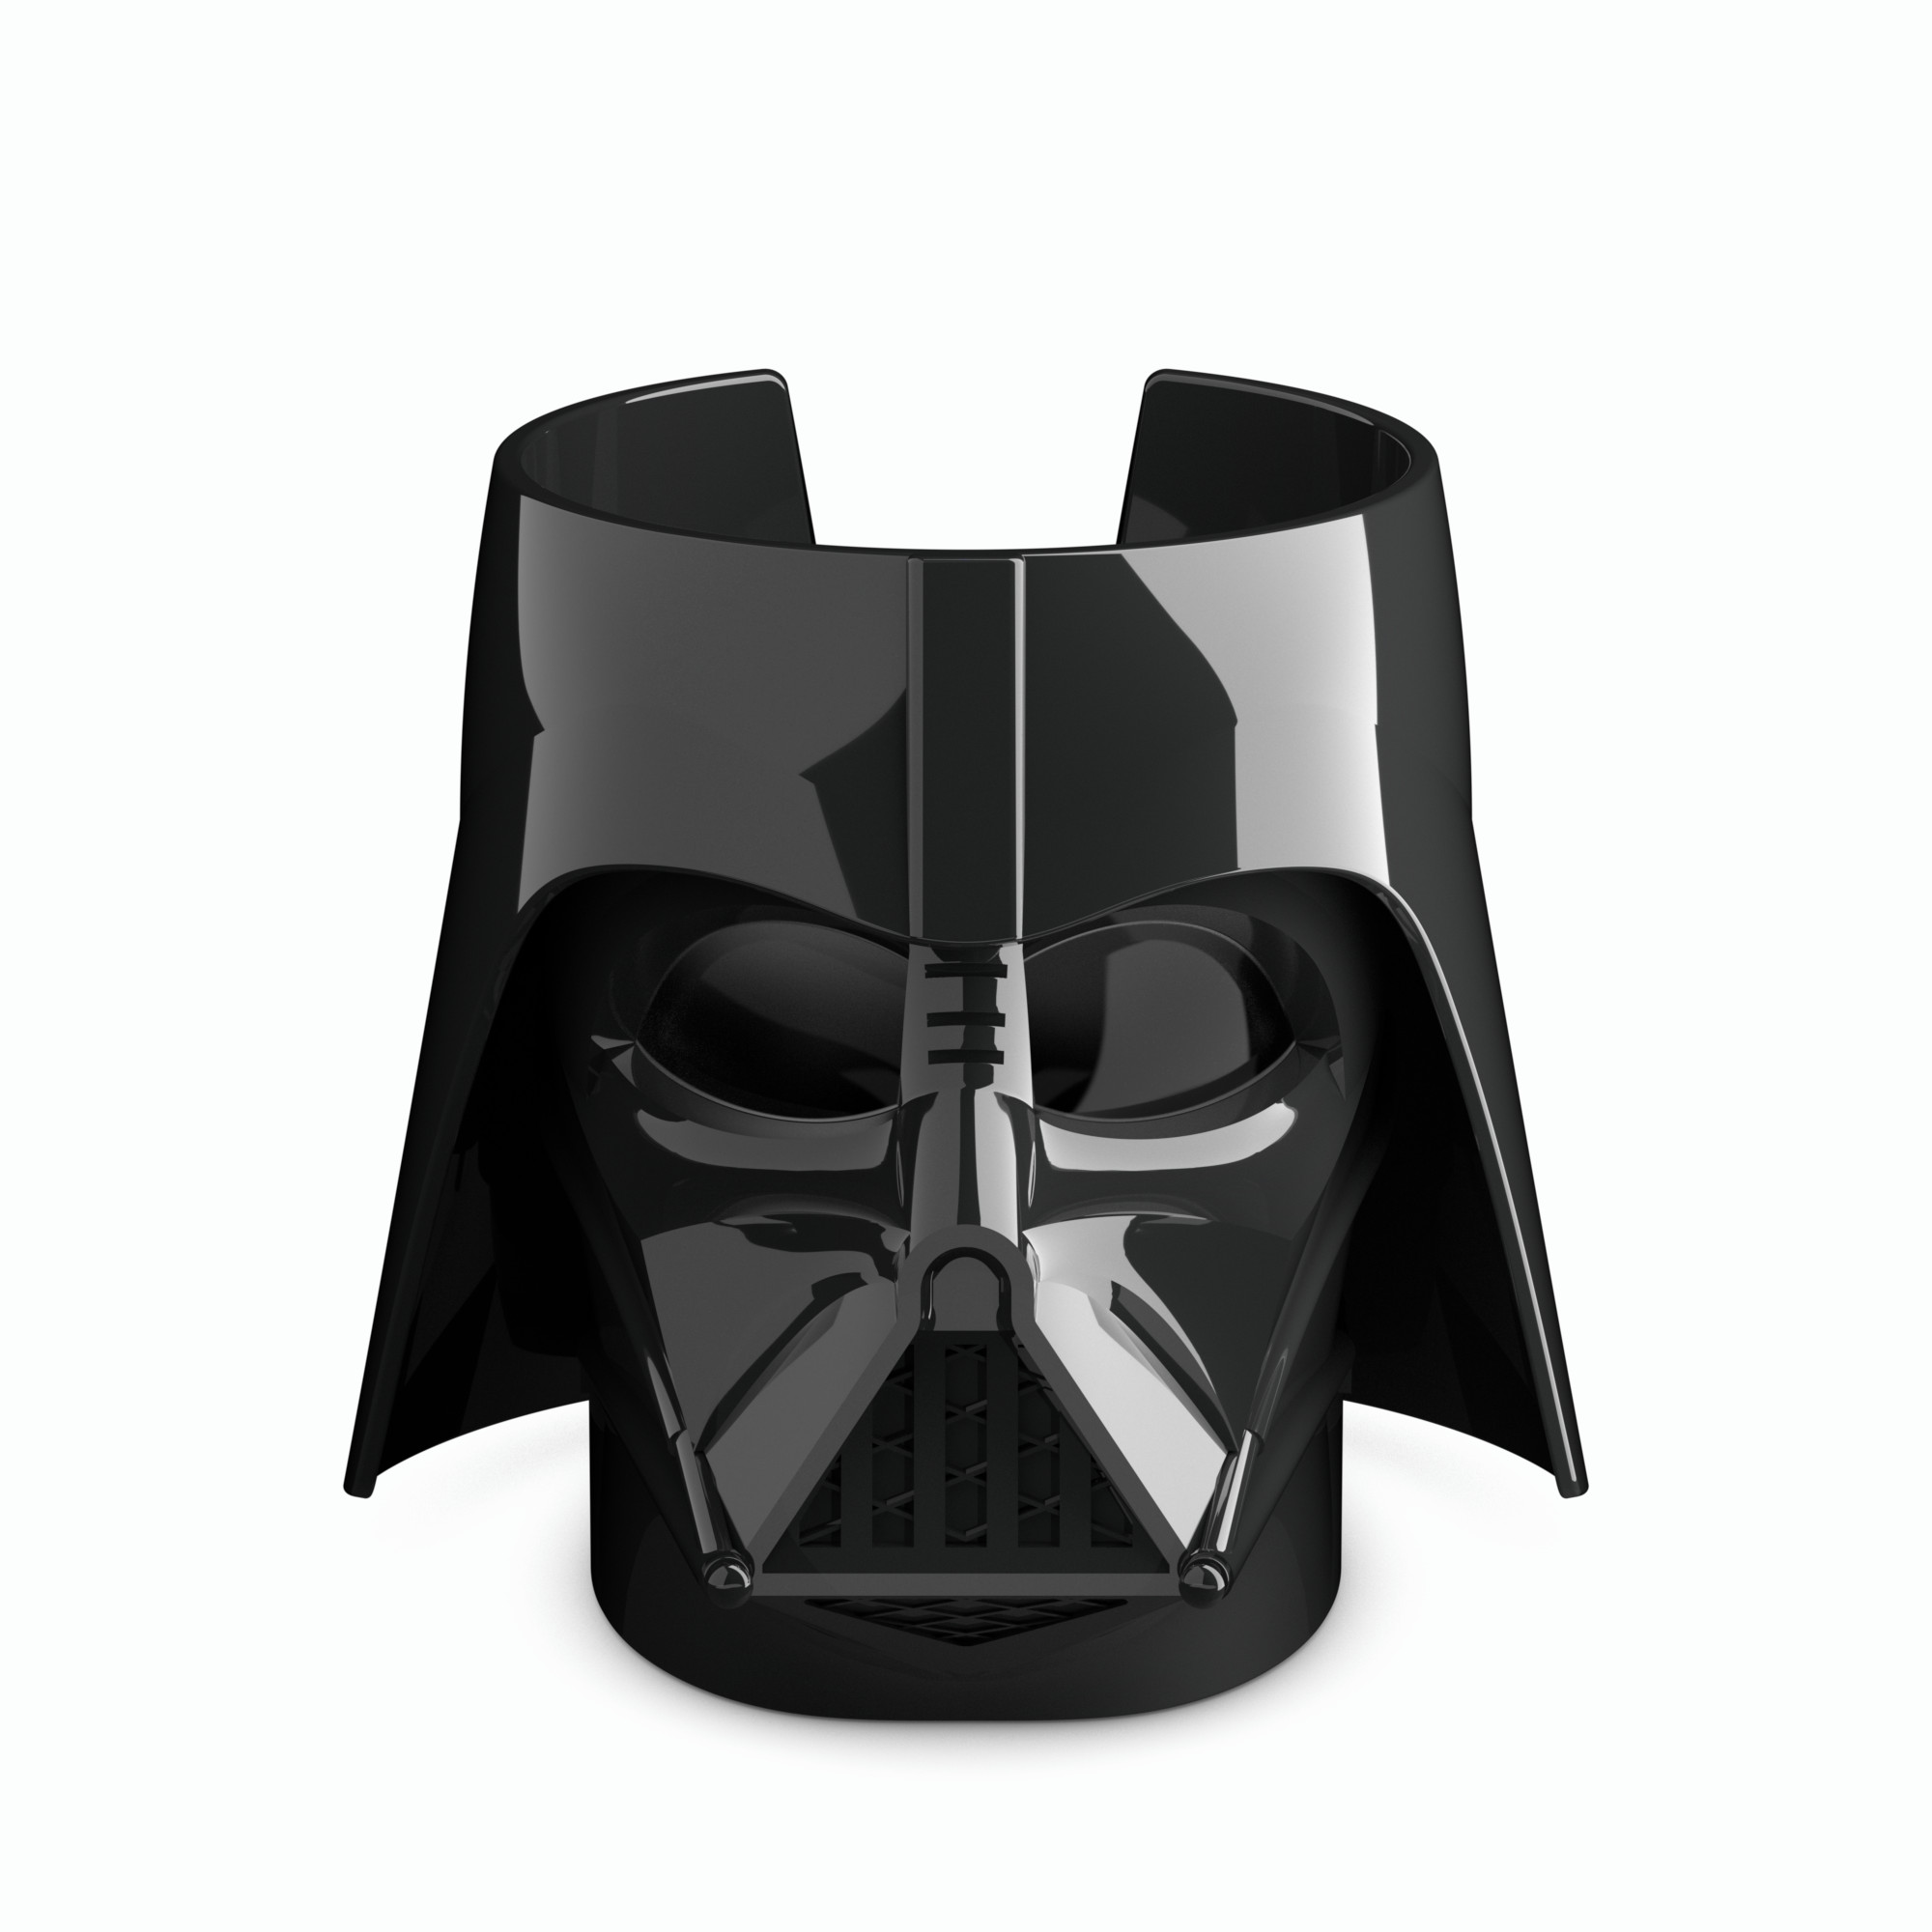 Product render of Darth Vader Helmet. Lighting, compositing, and material creation were made in Cinema4D